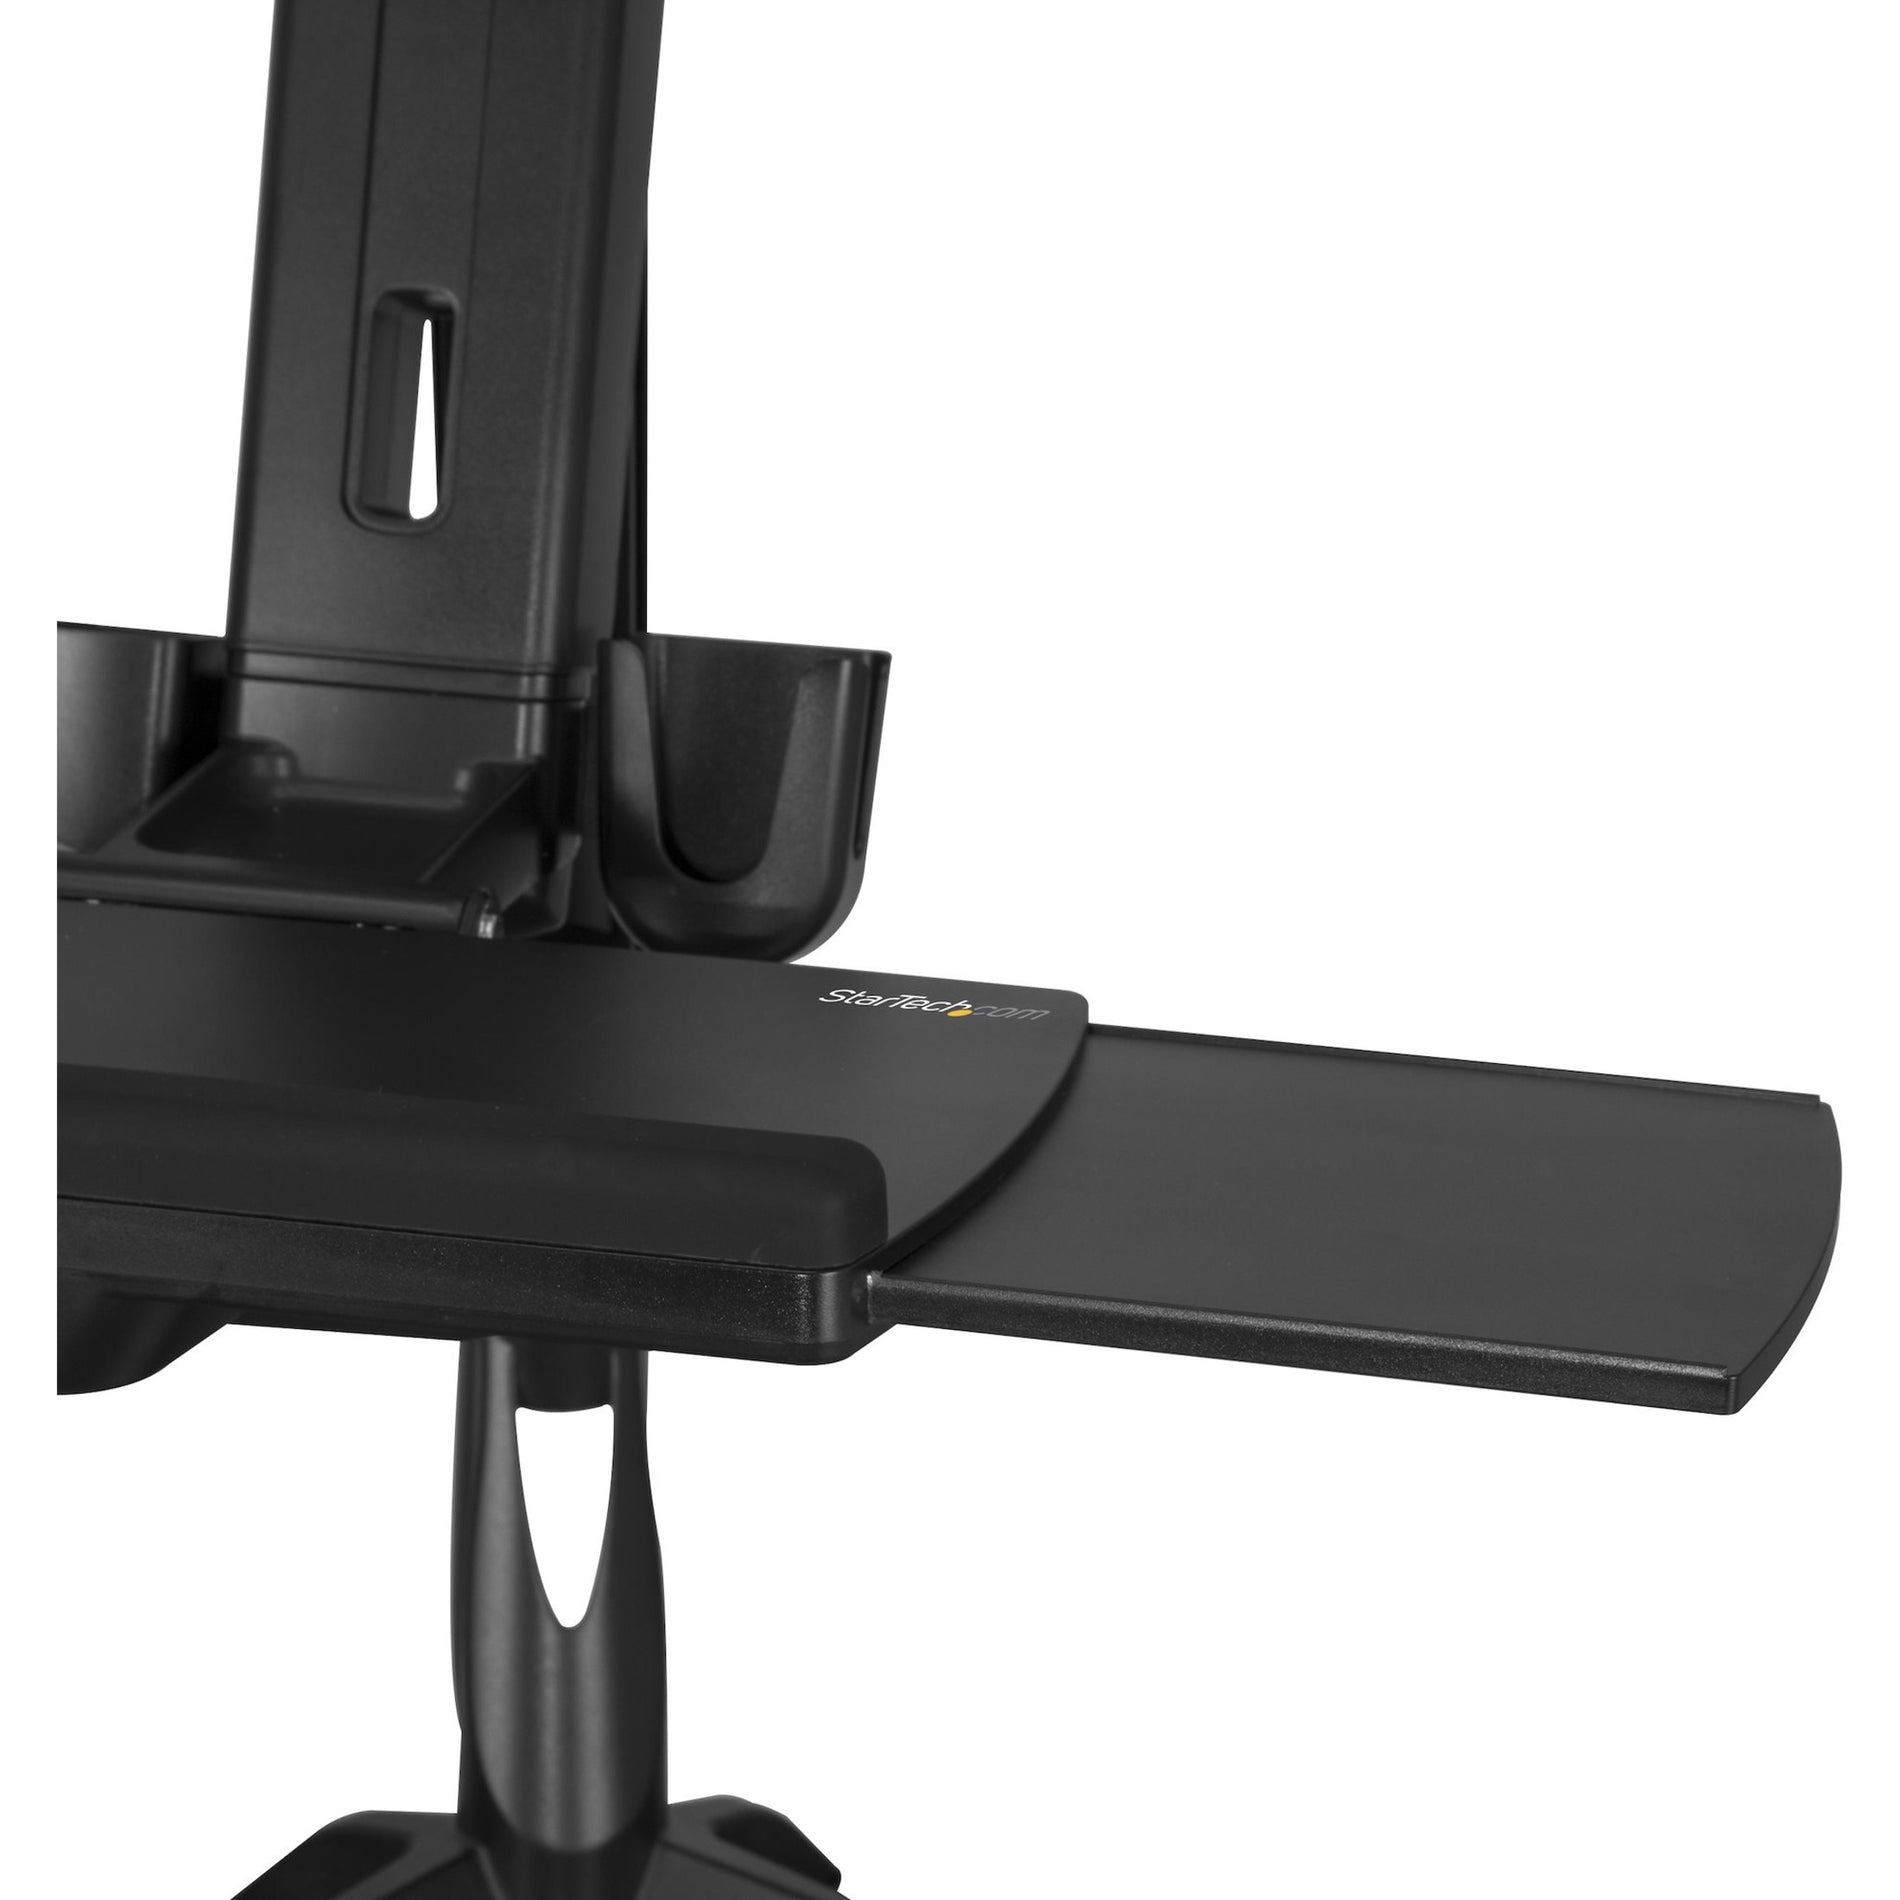 StarTech.com ARMSTSCP2 Sit-Stand Dual-Monitor Arm, Height Adjustable Ergonomic Desk, Holds Two VESA Mount Monitors up to 24in [Discontinued]